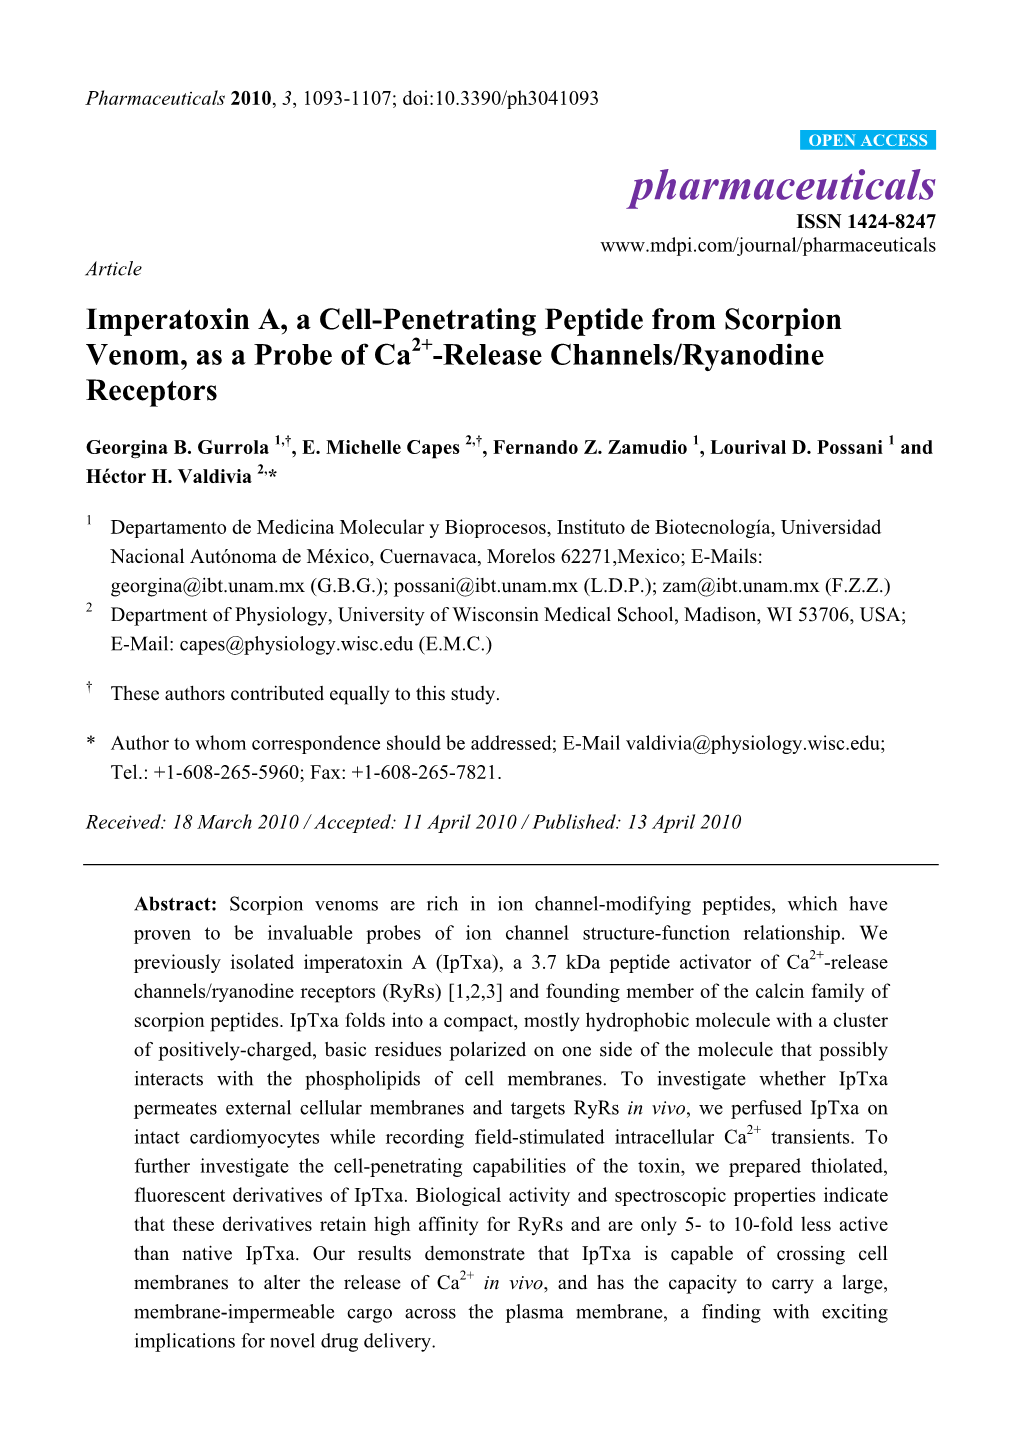 Imperatoxin A, a Cell-Penetrating Peptide from Scorpion Venom, As a Probe of Ca2+-Release Channels/Ryanodine Receptors